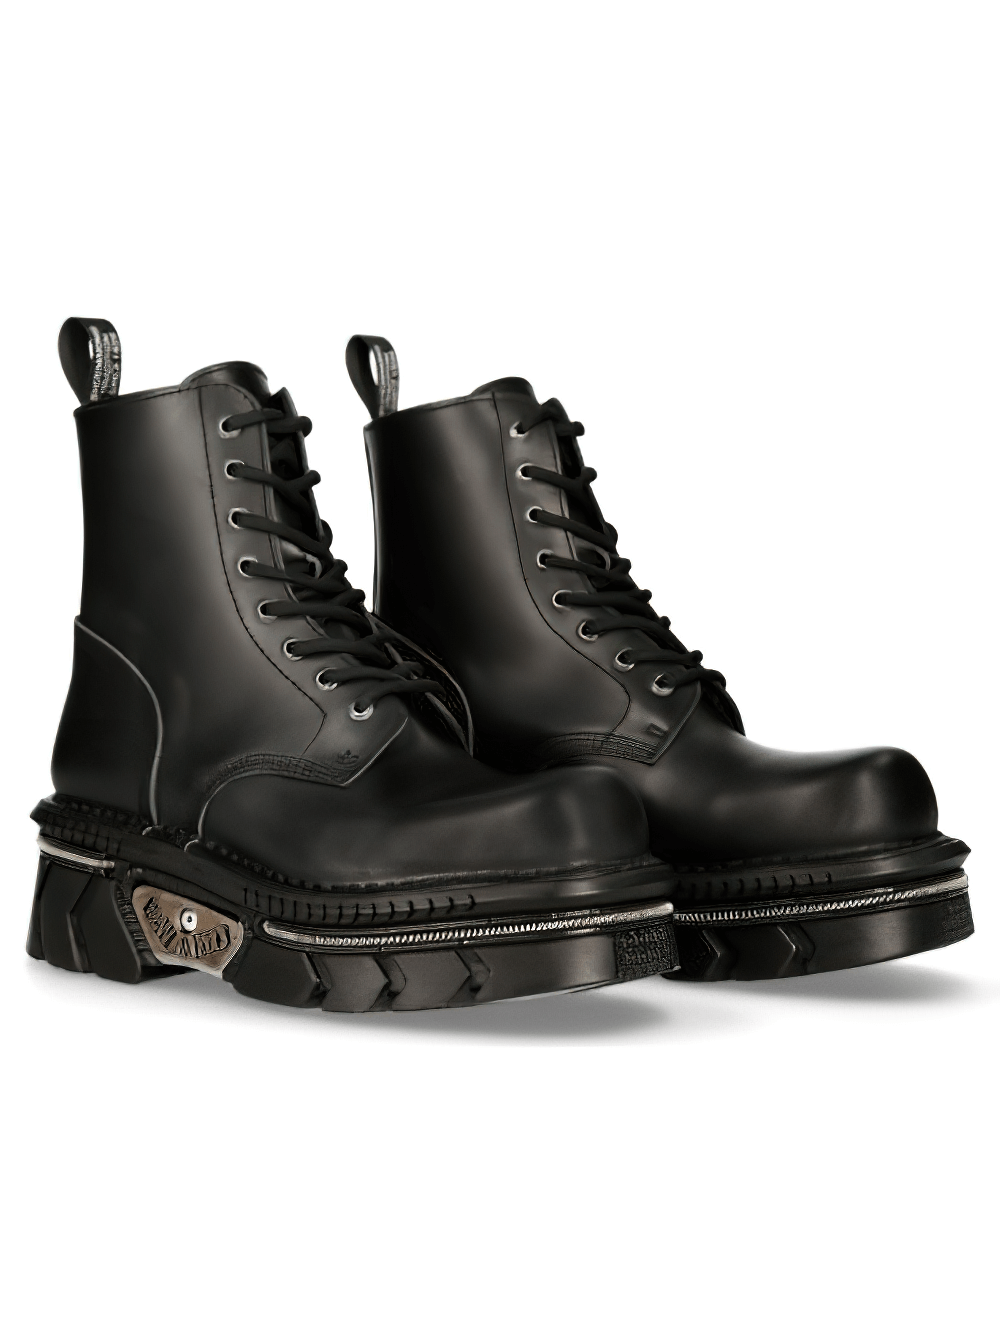 NEW ROCK Black Cow Leather Military Lace-Up Boots